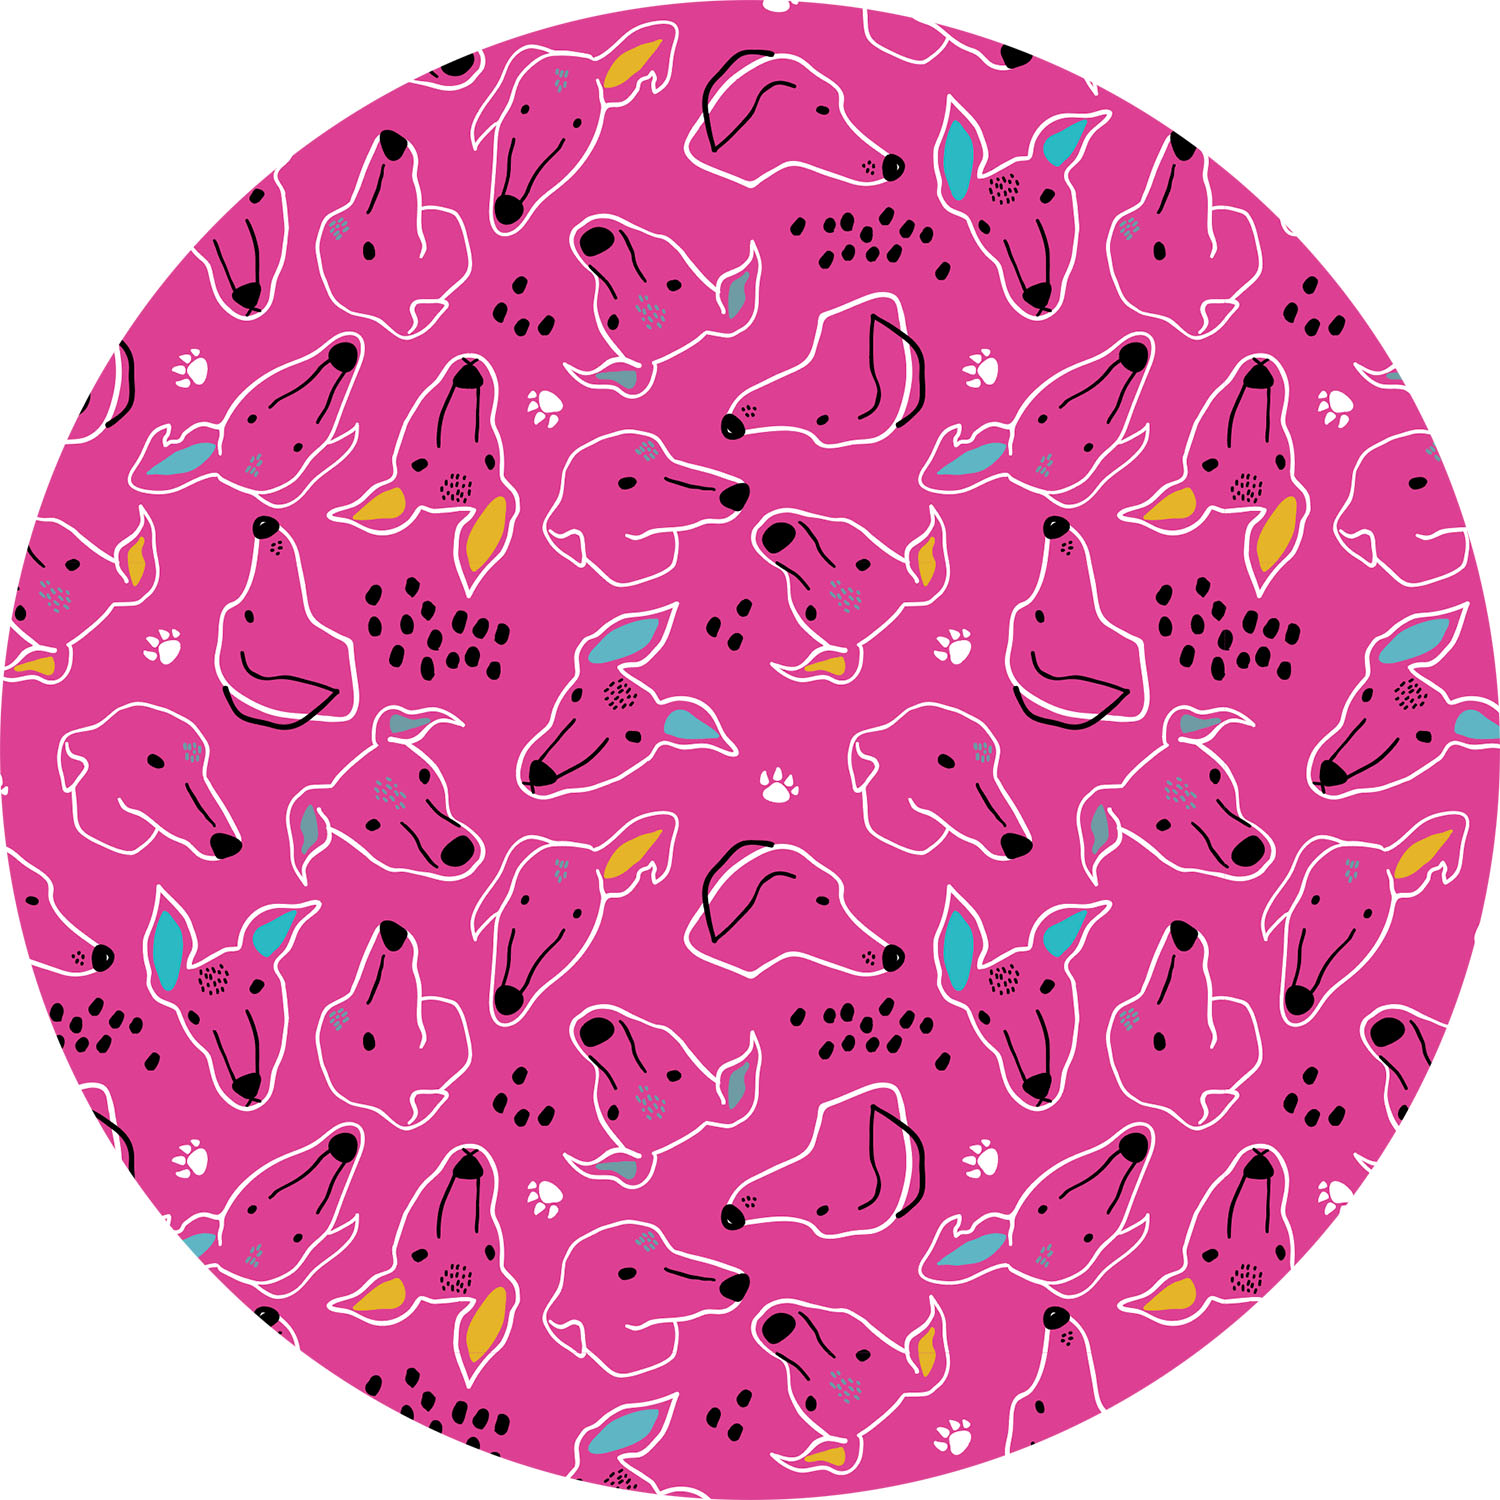 Sighthound leggings SIGHTHIE PINK - Wear.Chartbeat image 2